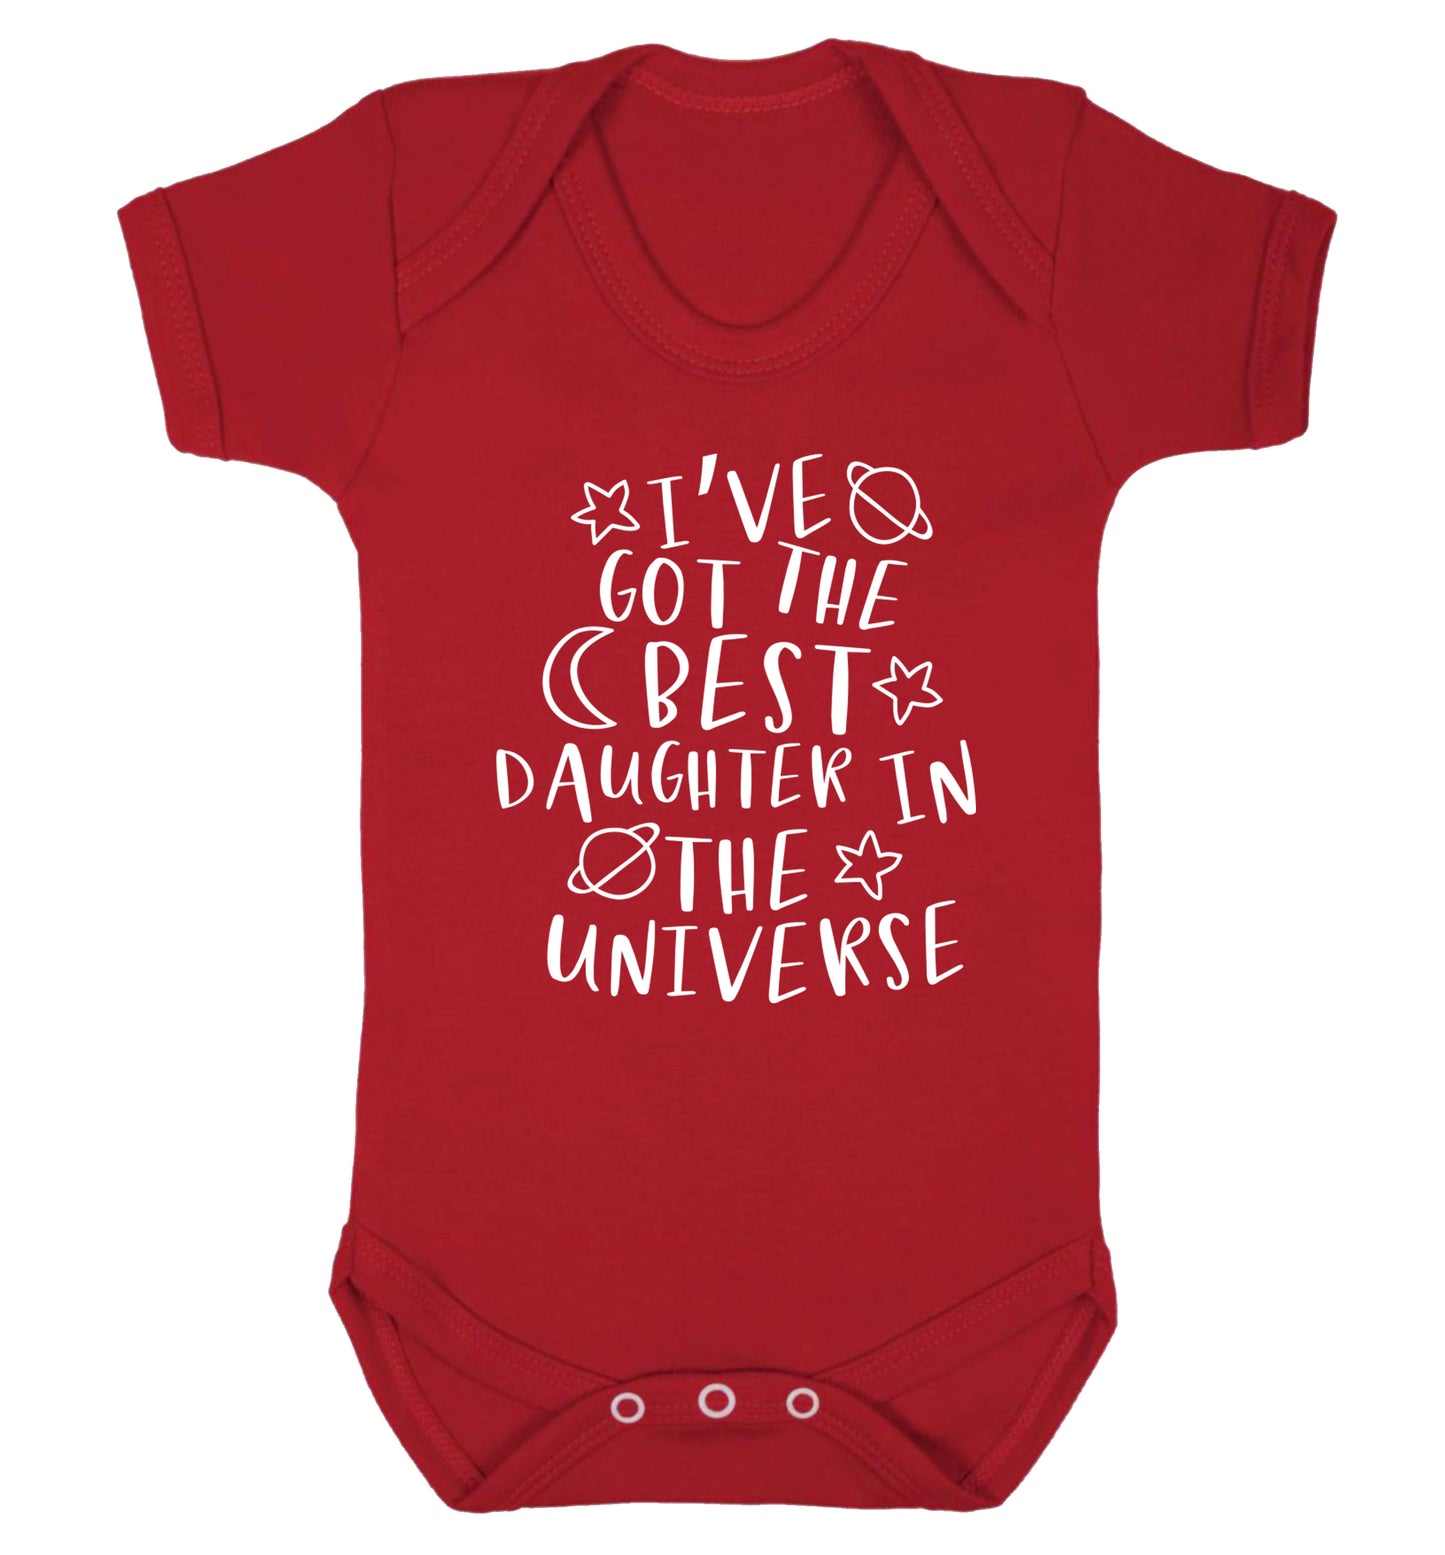 I've got the best daughter in the universe Baby Vest red 18-24 months